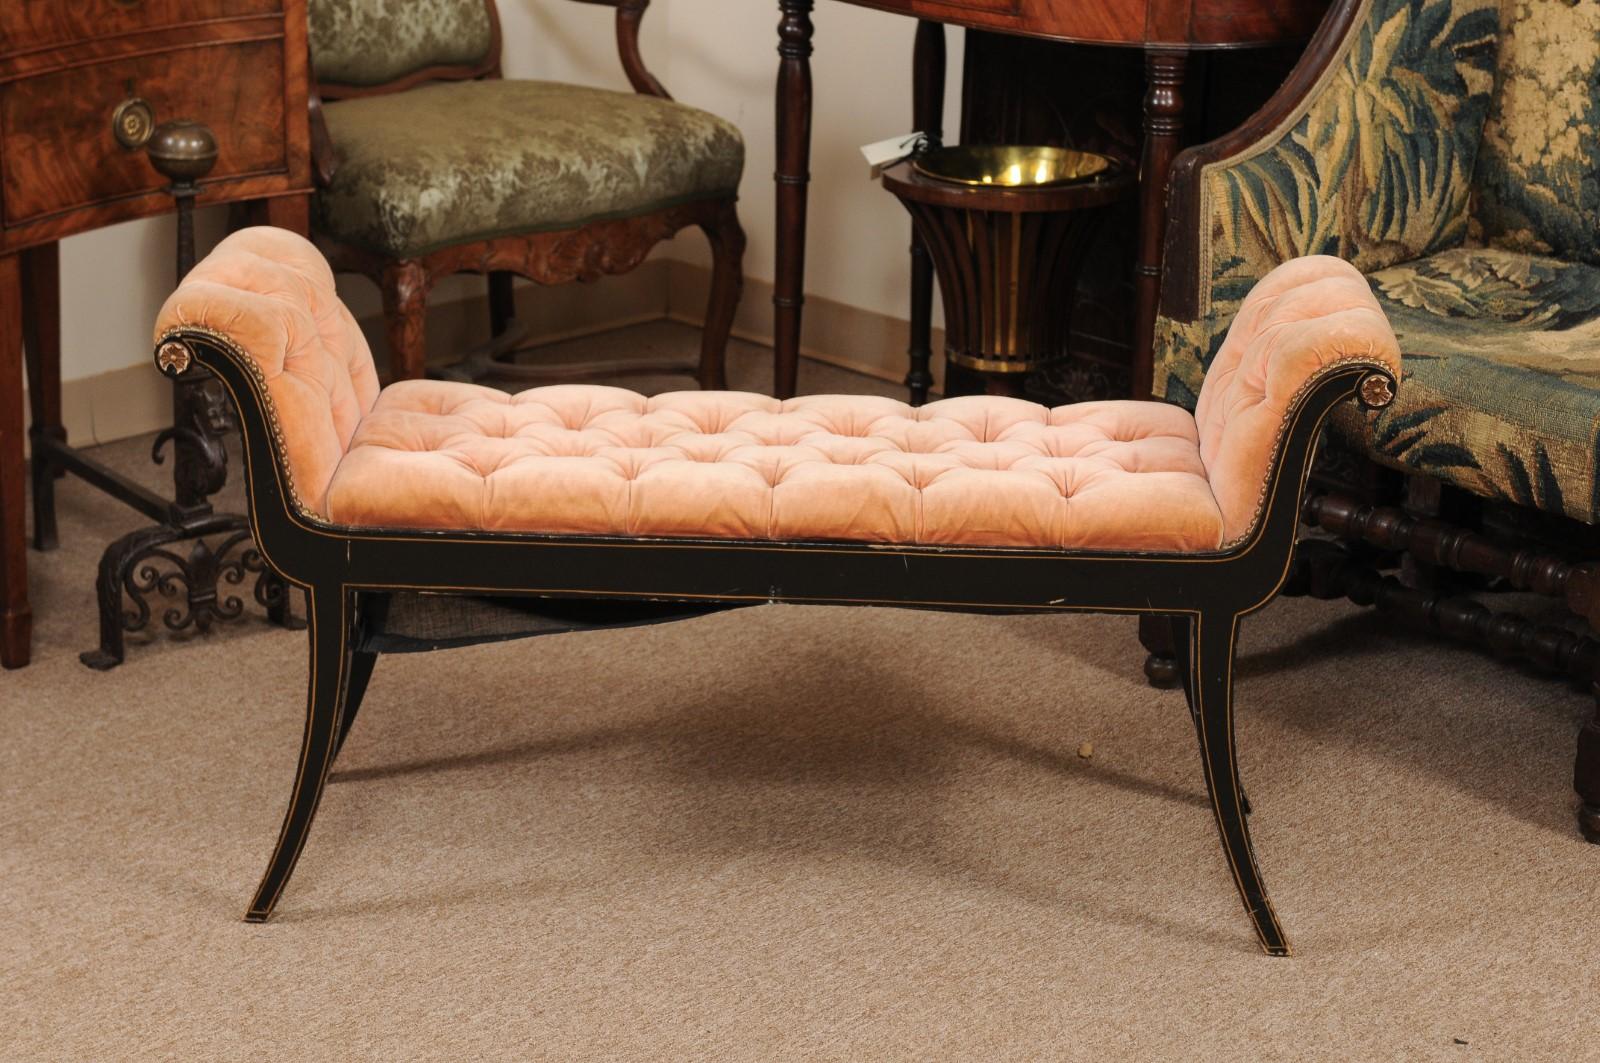 The Regency style black painted and parcel-gilt bench with scrolled arms with carved flower detail, velvet tufted upholstery in peach hues and all resting on splayed legs. 

  